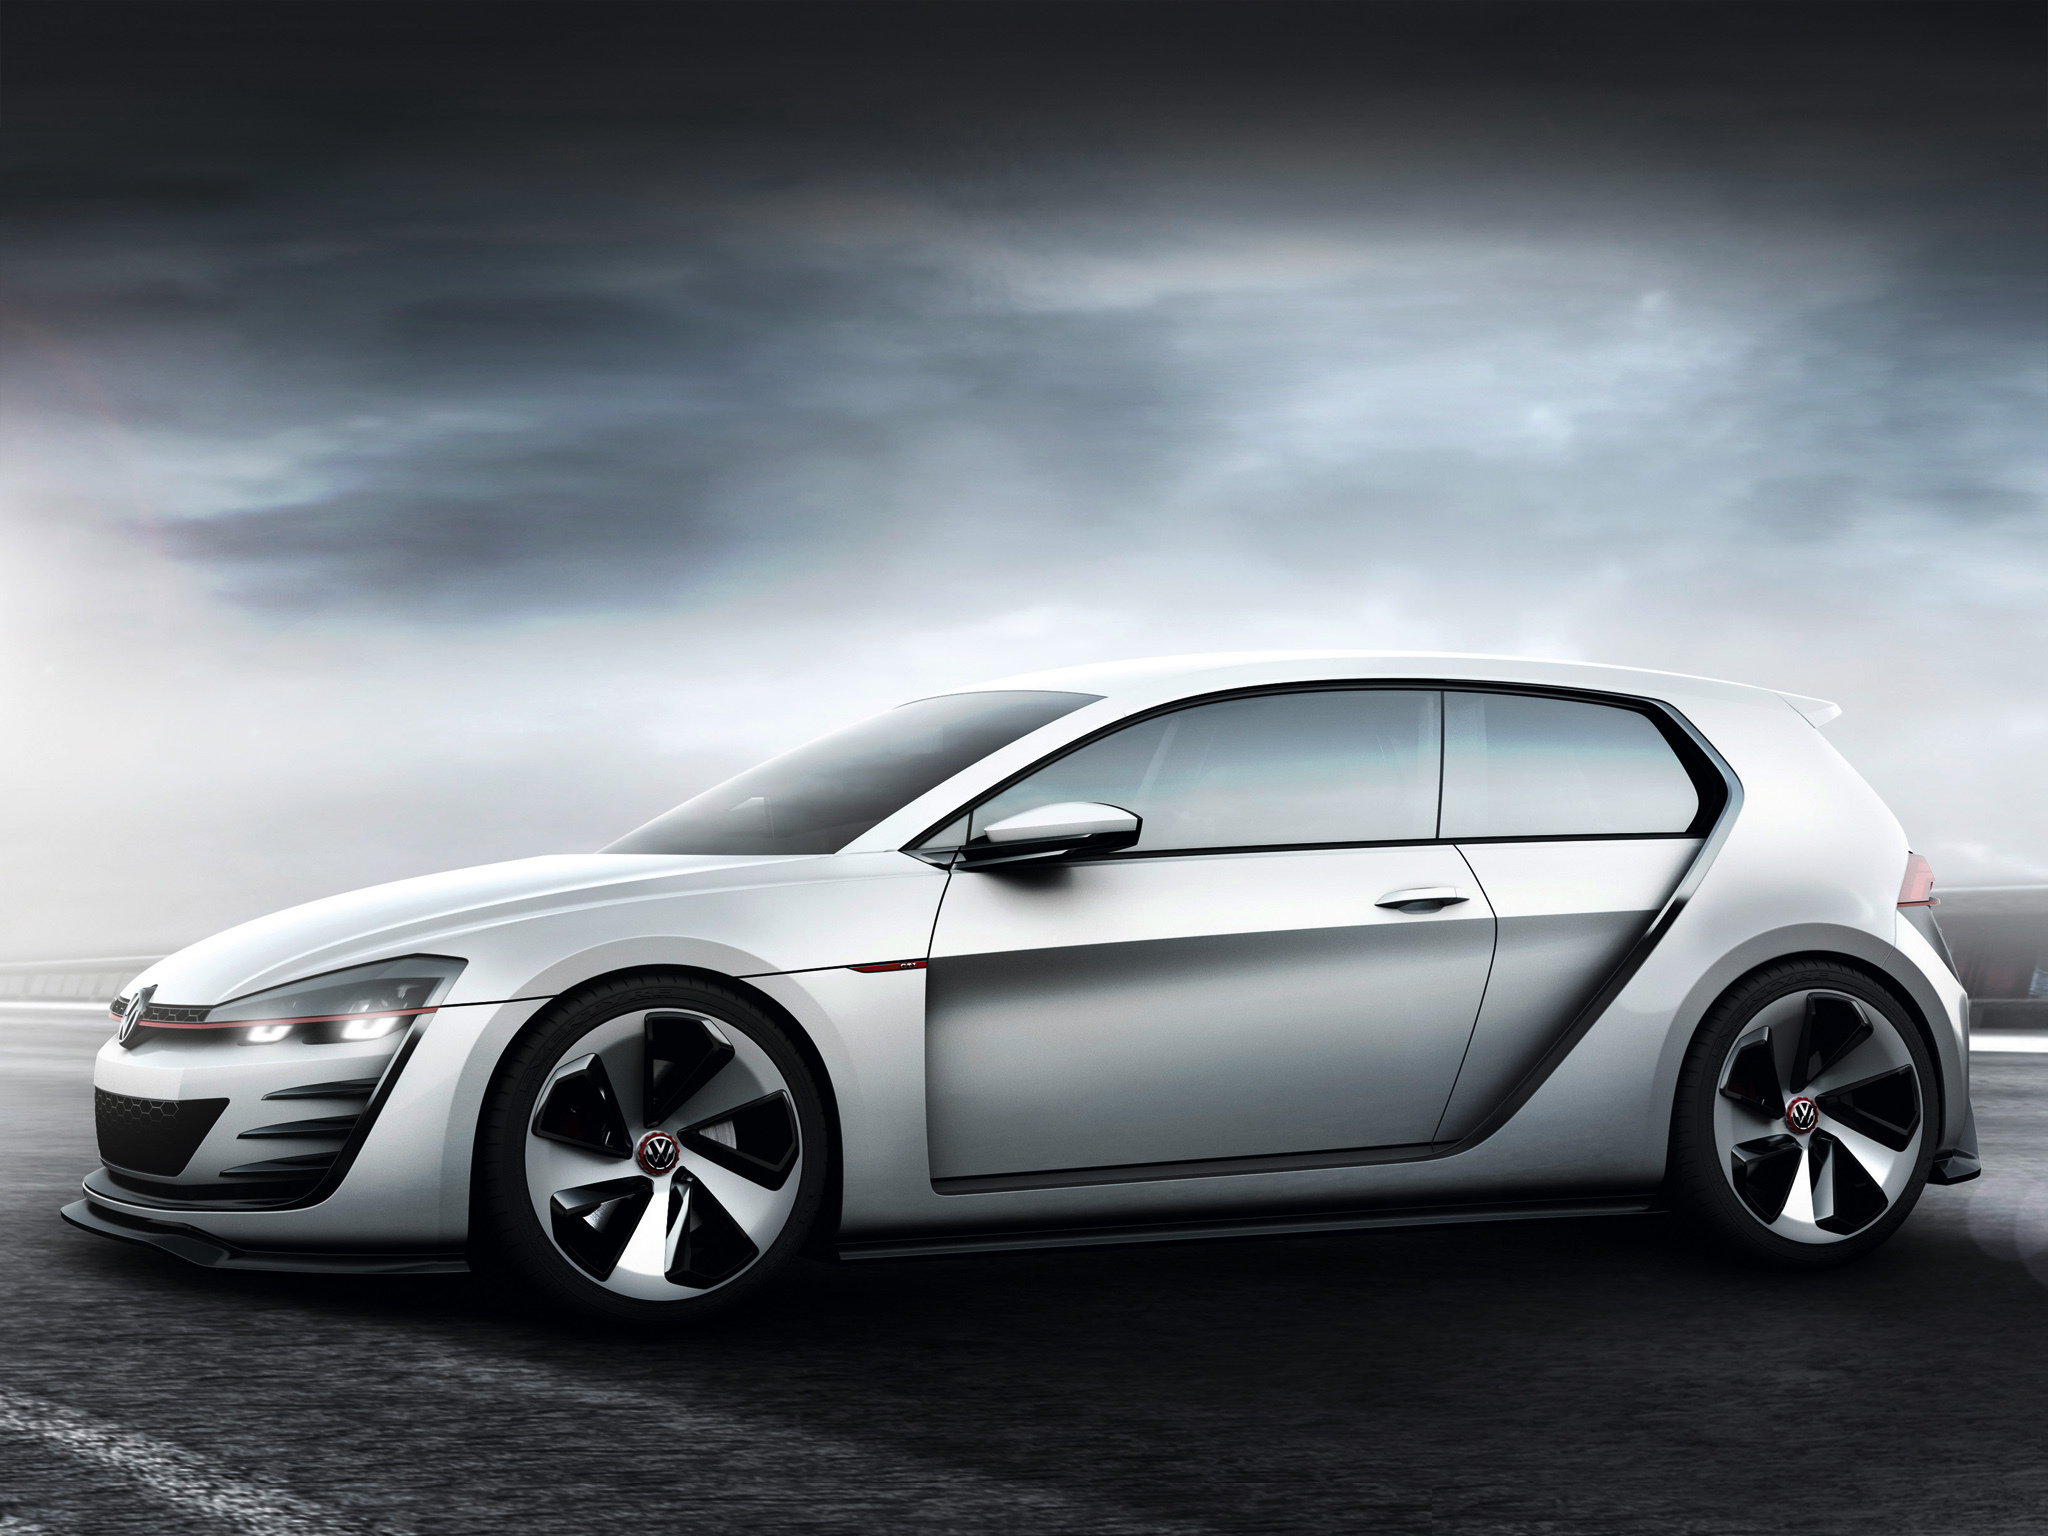 gti, volkswagen, design vision, cars Square Wallpapers